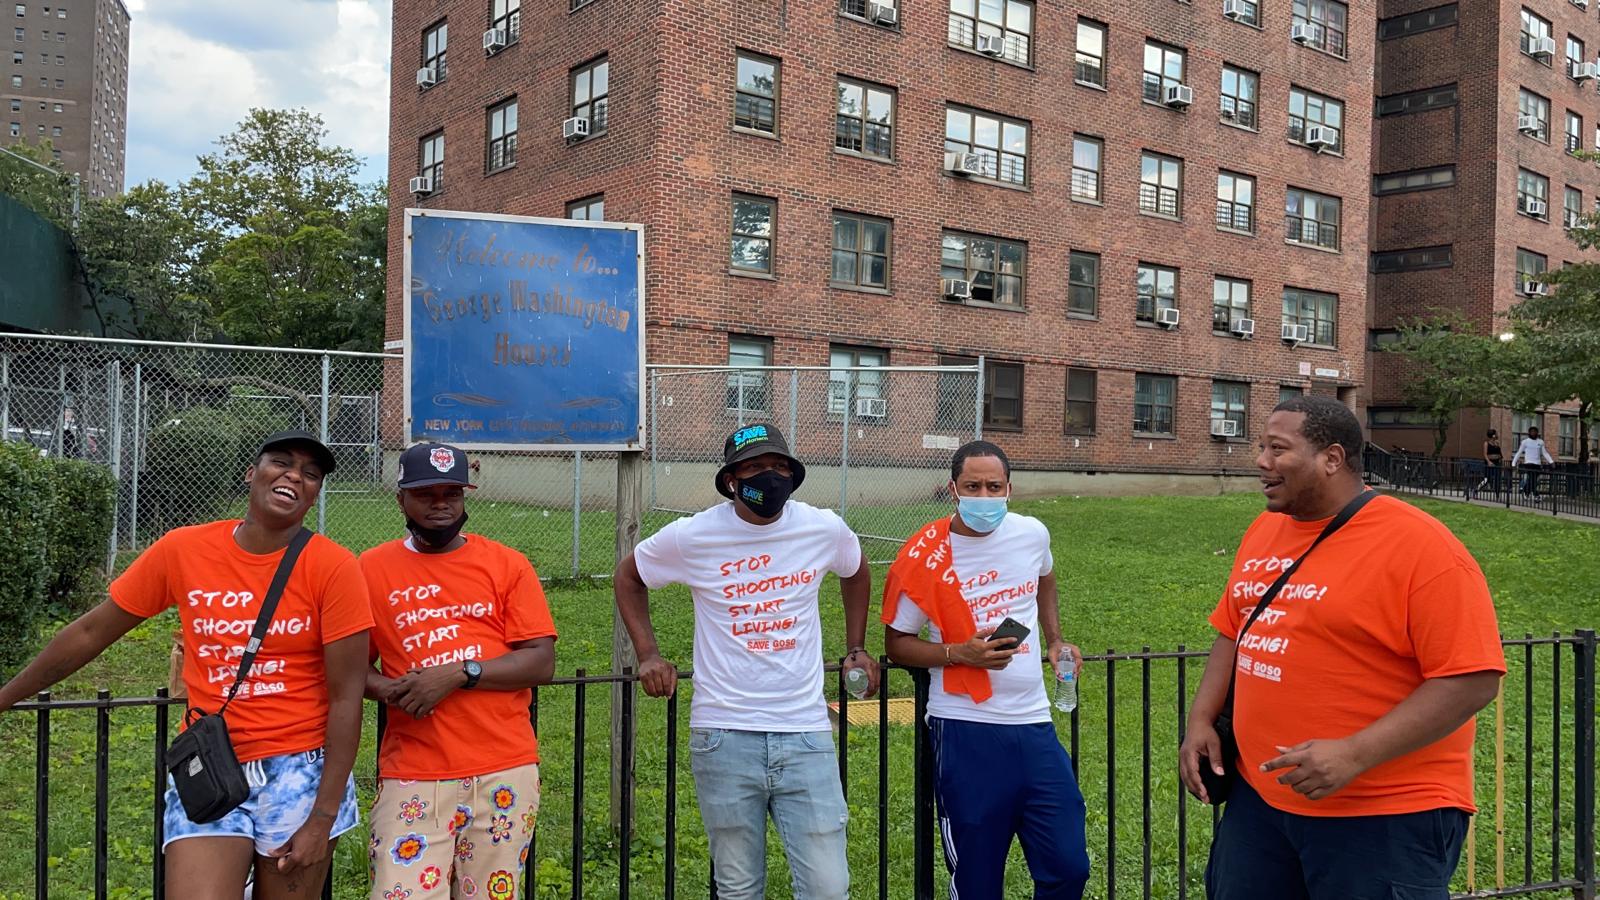 There Are Only Two City-Funded Violence Prevention Sites Tackling Surging Violence in Upper Manhattan